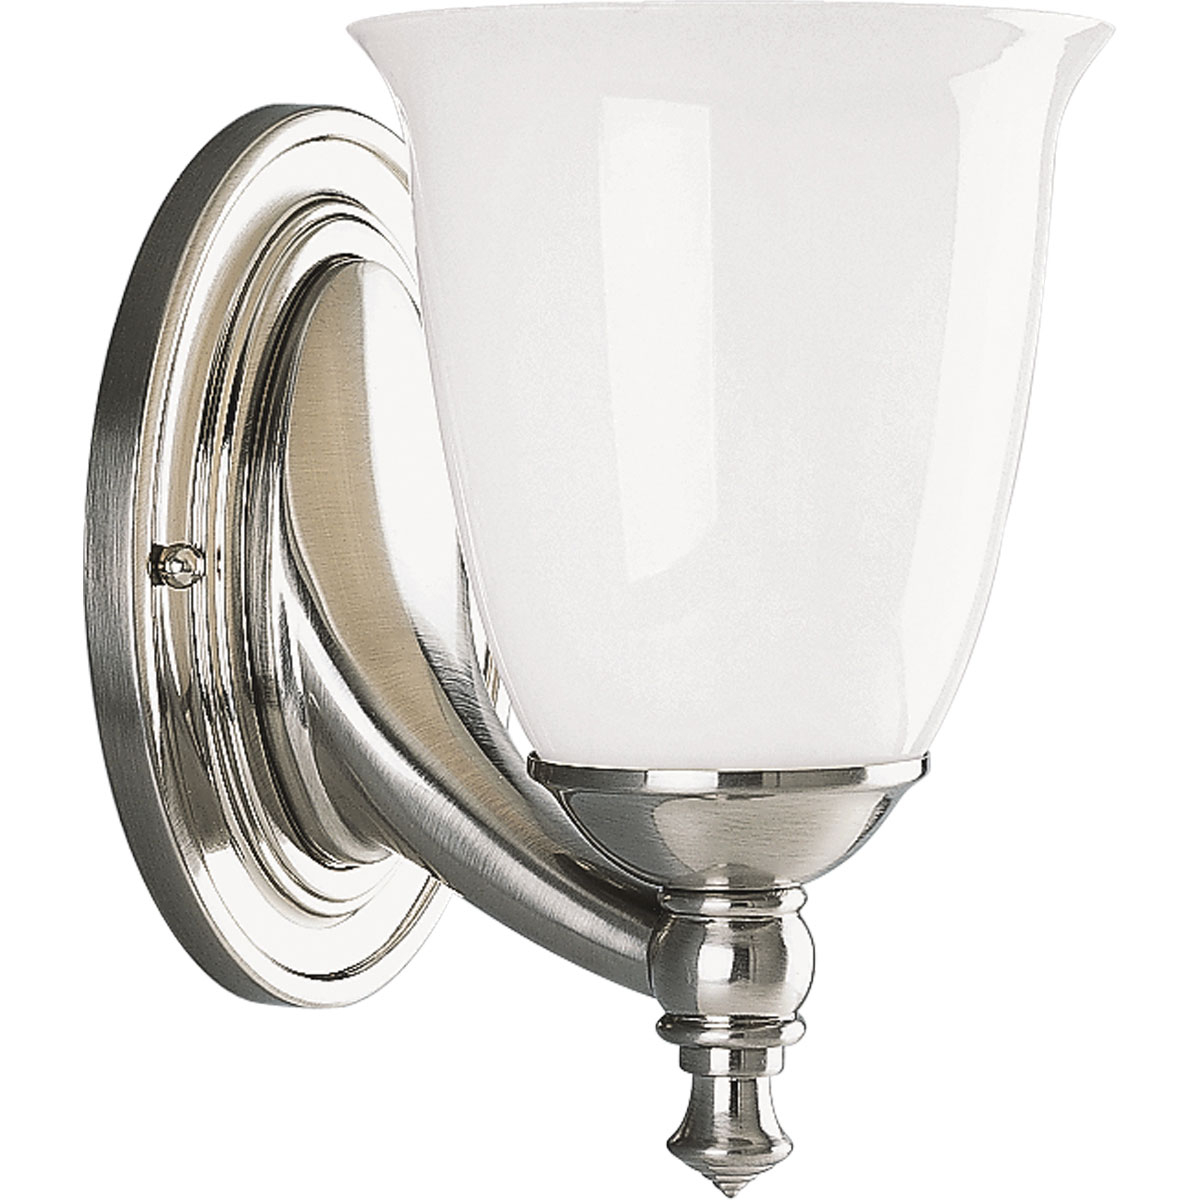 Feeling nostalgic for simpler times, The Victorian Collection helps you create a vintage look in any room. This Brushed Nickel one-light bath fixture is boldly simple with pure white, triplex opal glass shades and precise metal fittings. Coordinates with Delta Faucet fixtures to provide a whole-room decorating solution. This fixture can be installed with the glass facing up or down to suit your preference.